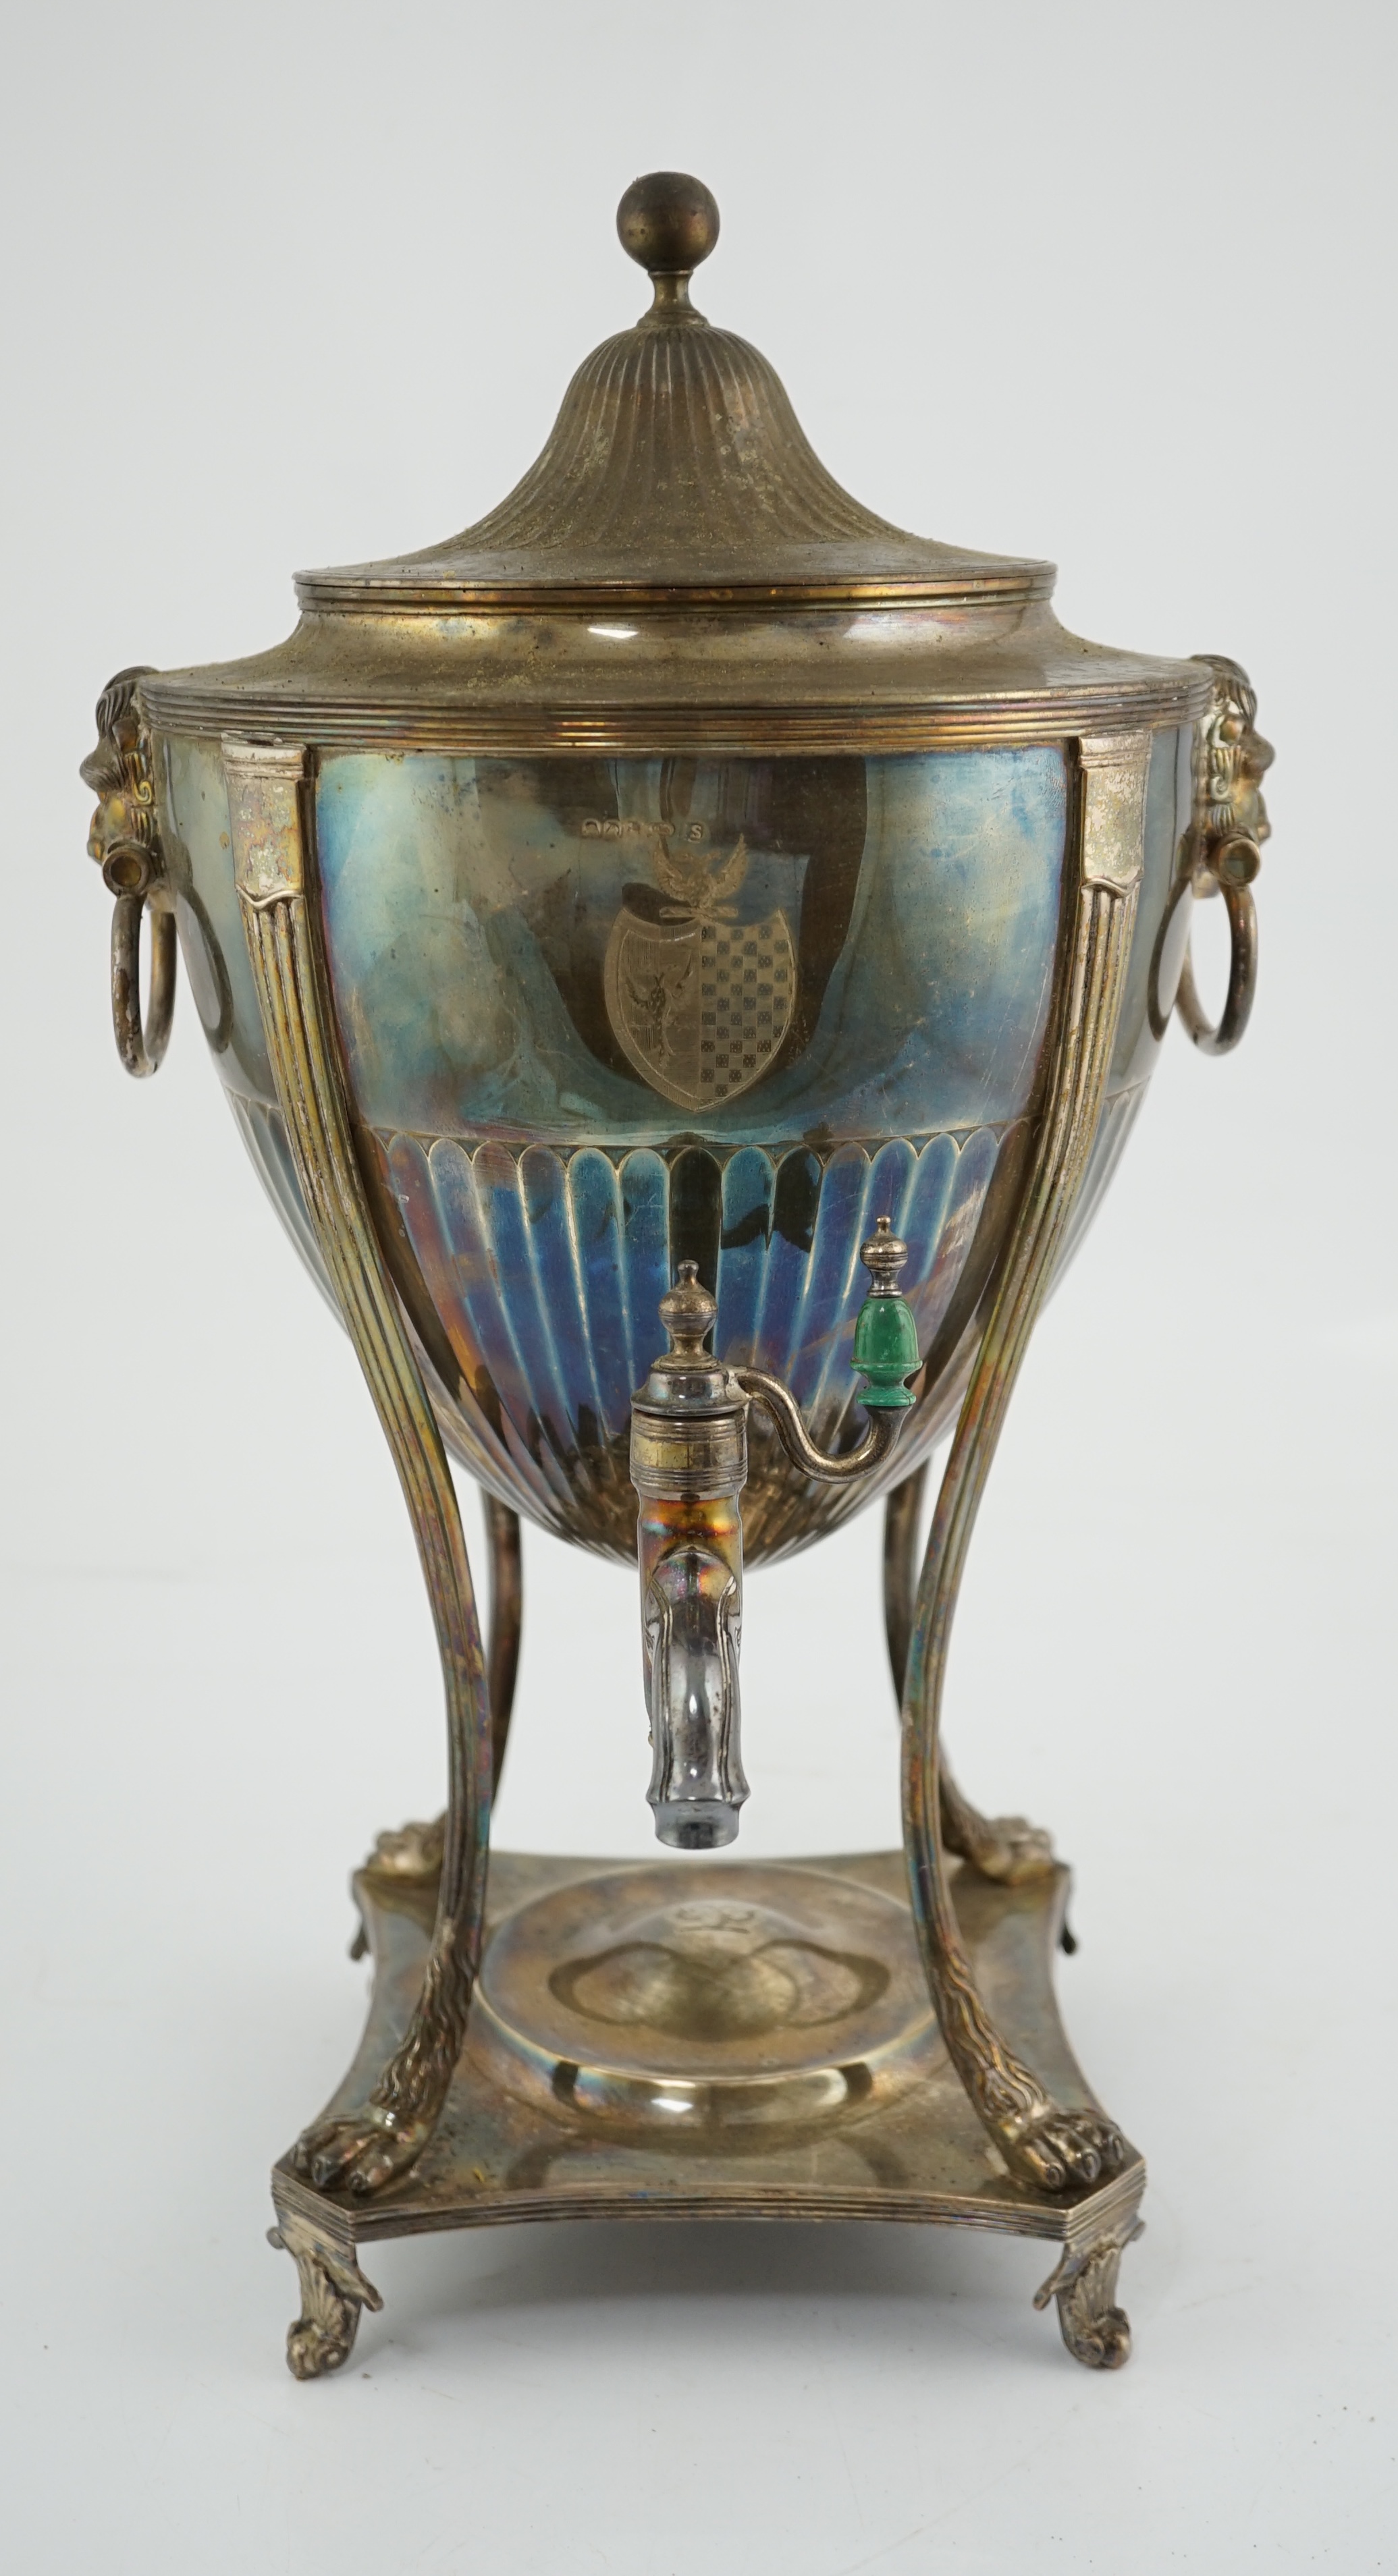 A George III demi-fluted silver tea urn and cover, by John Scofield, CITES submission reference:LS7U2WVX